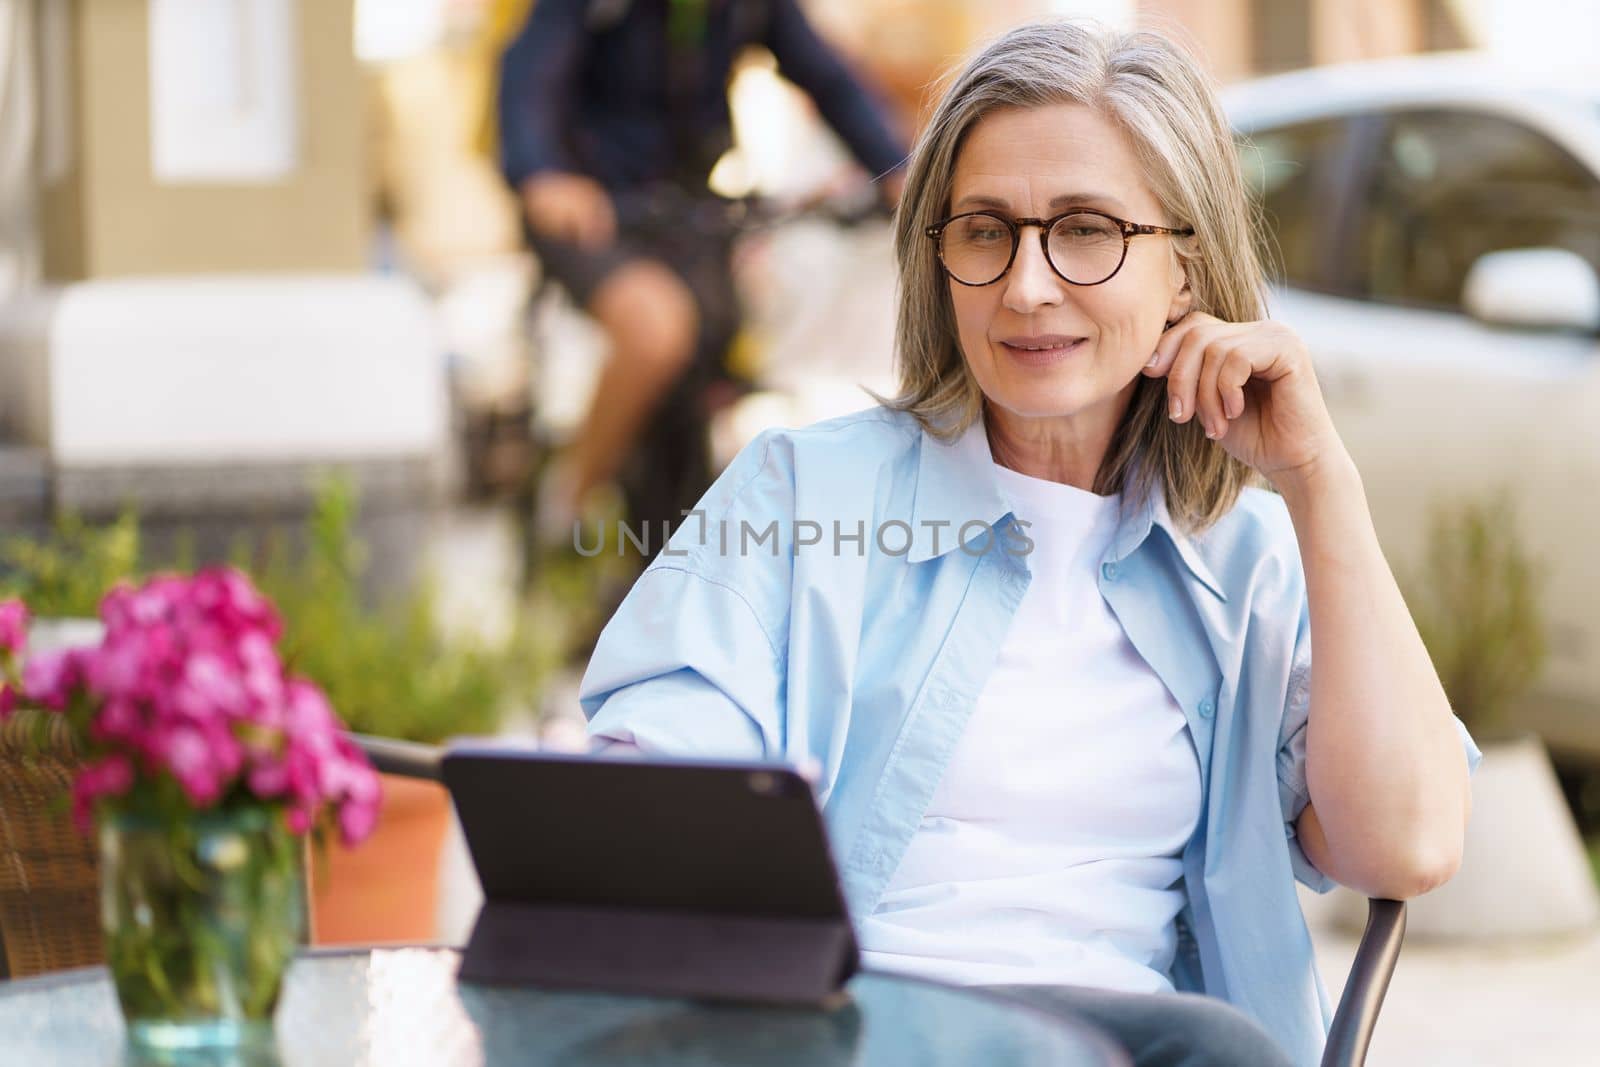 Mature European woman seated at an outdoor cafe, browsing information on her tablet PC. She appears relaxed and content, enjoying her leisure time while staying connected through the convenience of technology. High quality photo